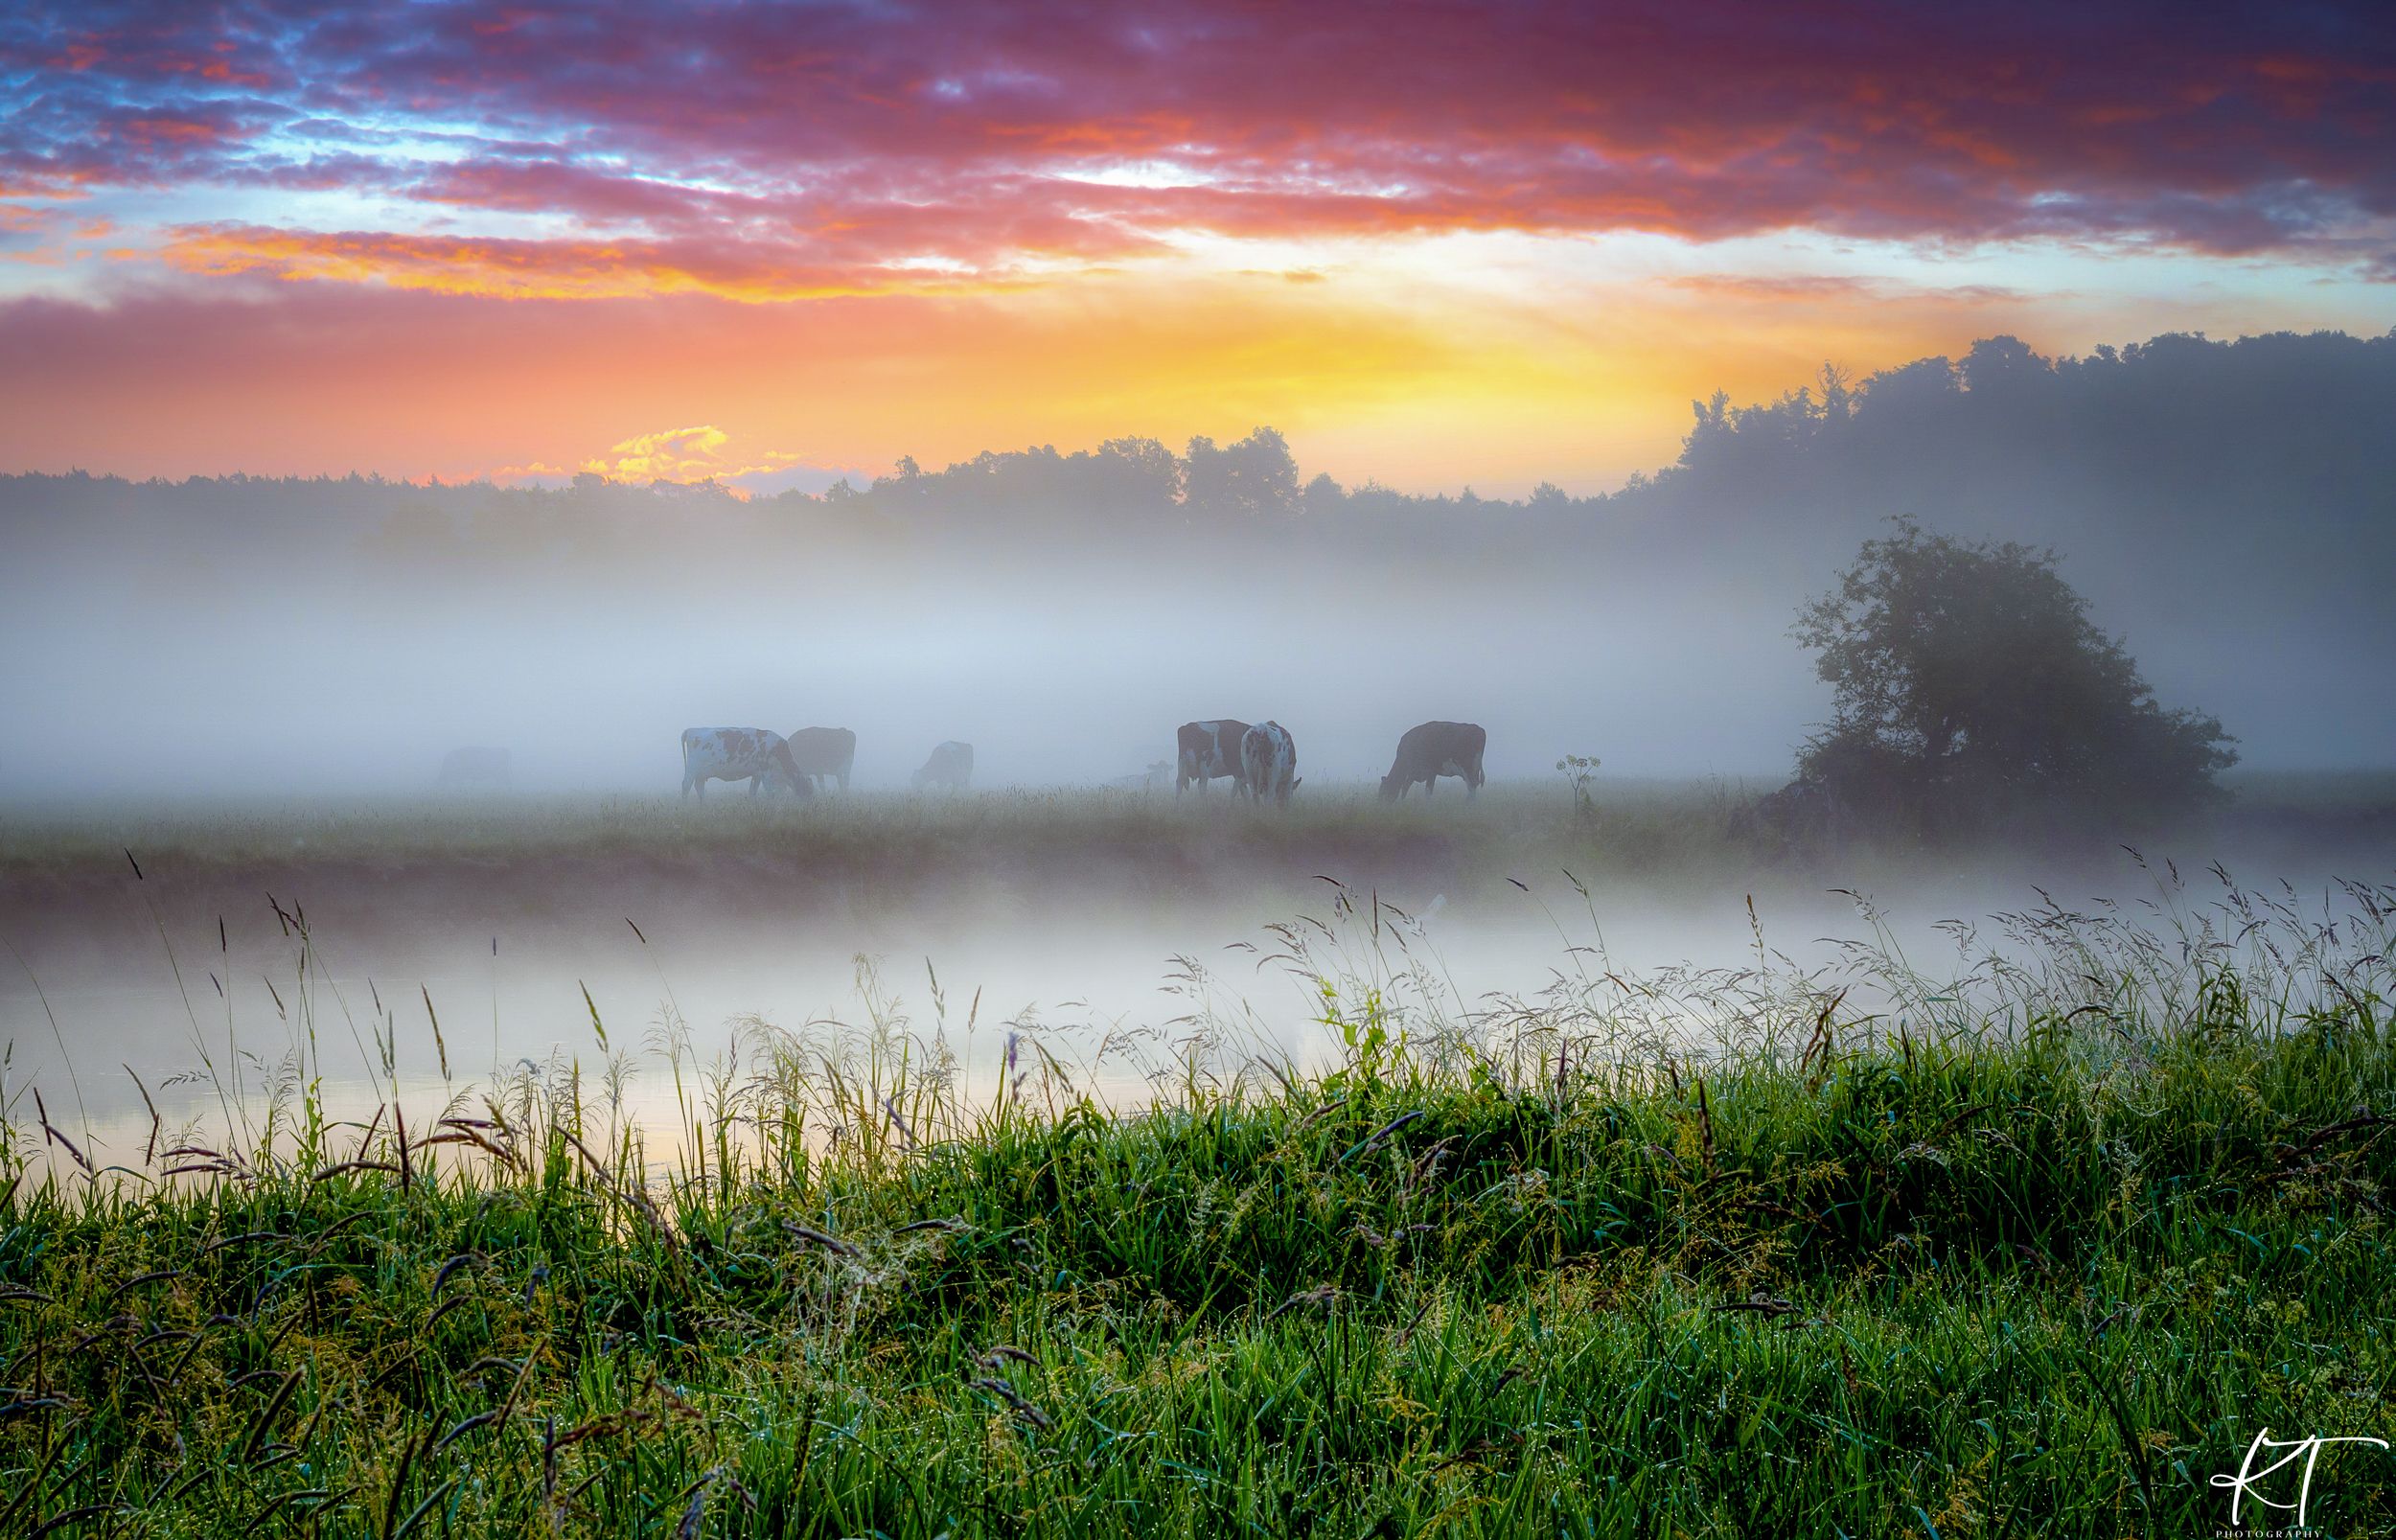 sunrise  cows  herd of cows  river  Gwda  landscape  nature  sky  clouds  fog  atmosphere  light  trees  forest  dawn, Krzysztof Tollas